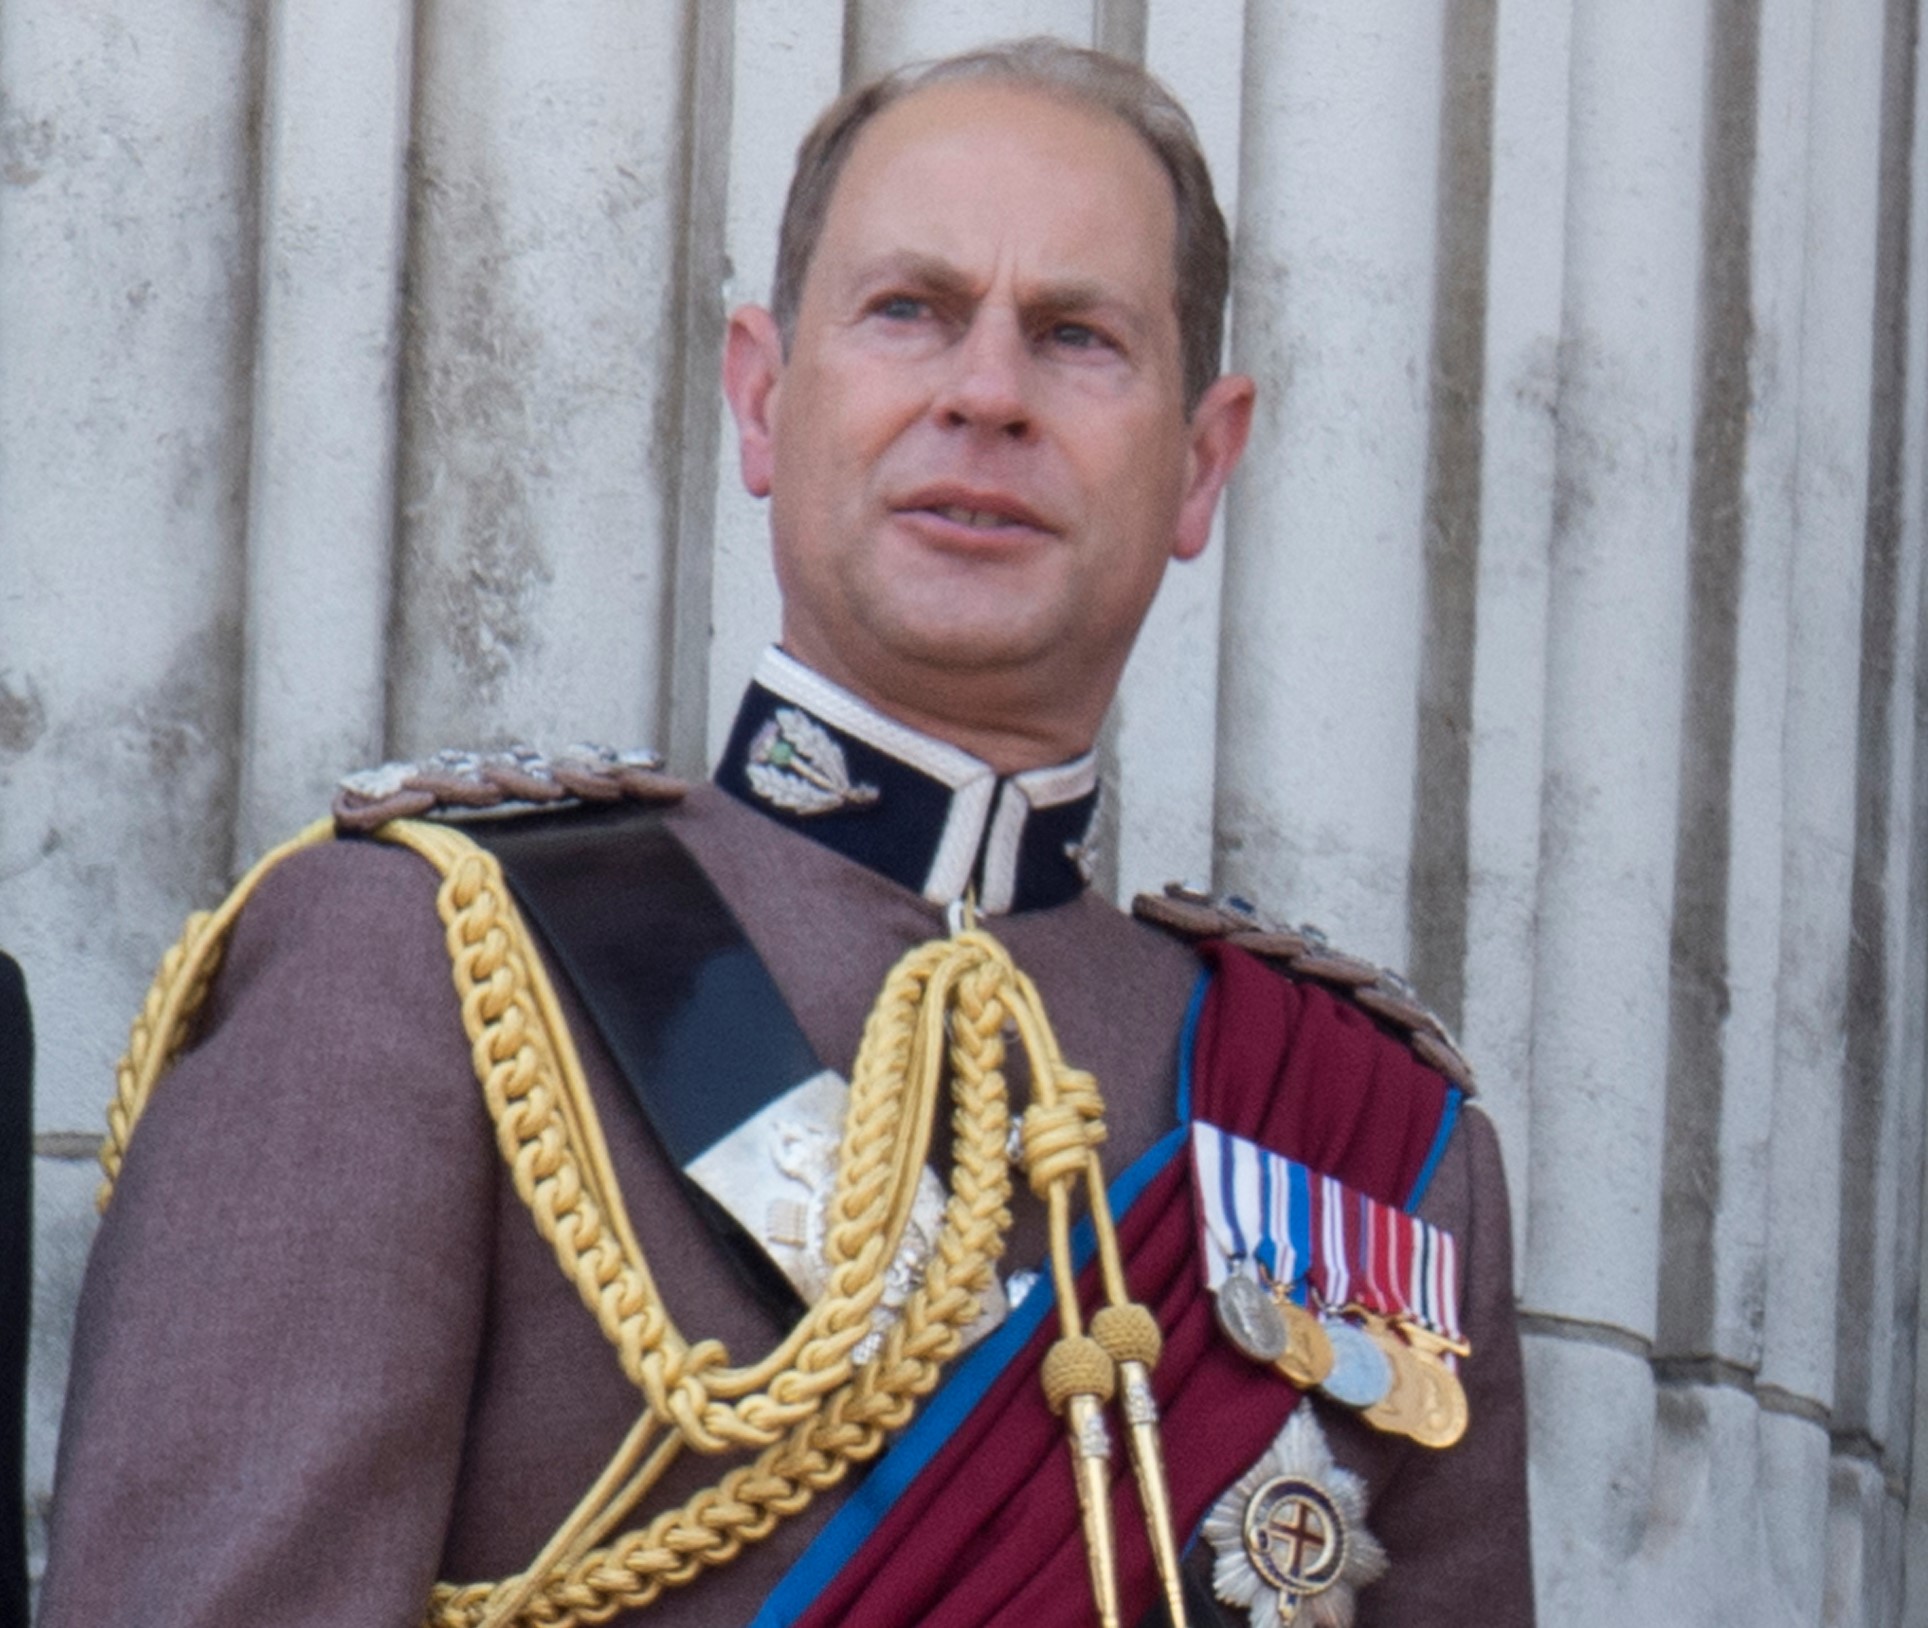 The Queen's Son Prince Edward Angrily Shot Toward Paparazzi During